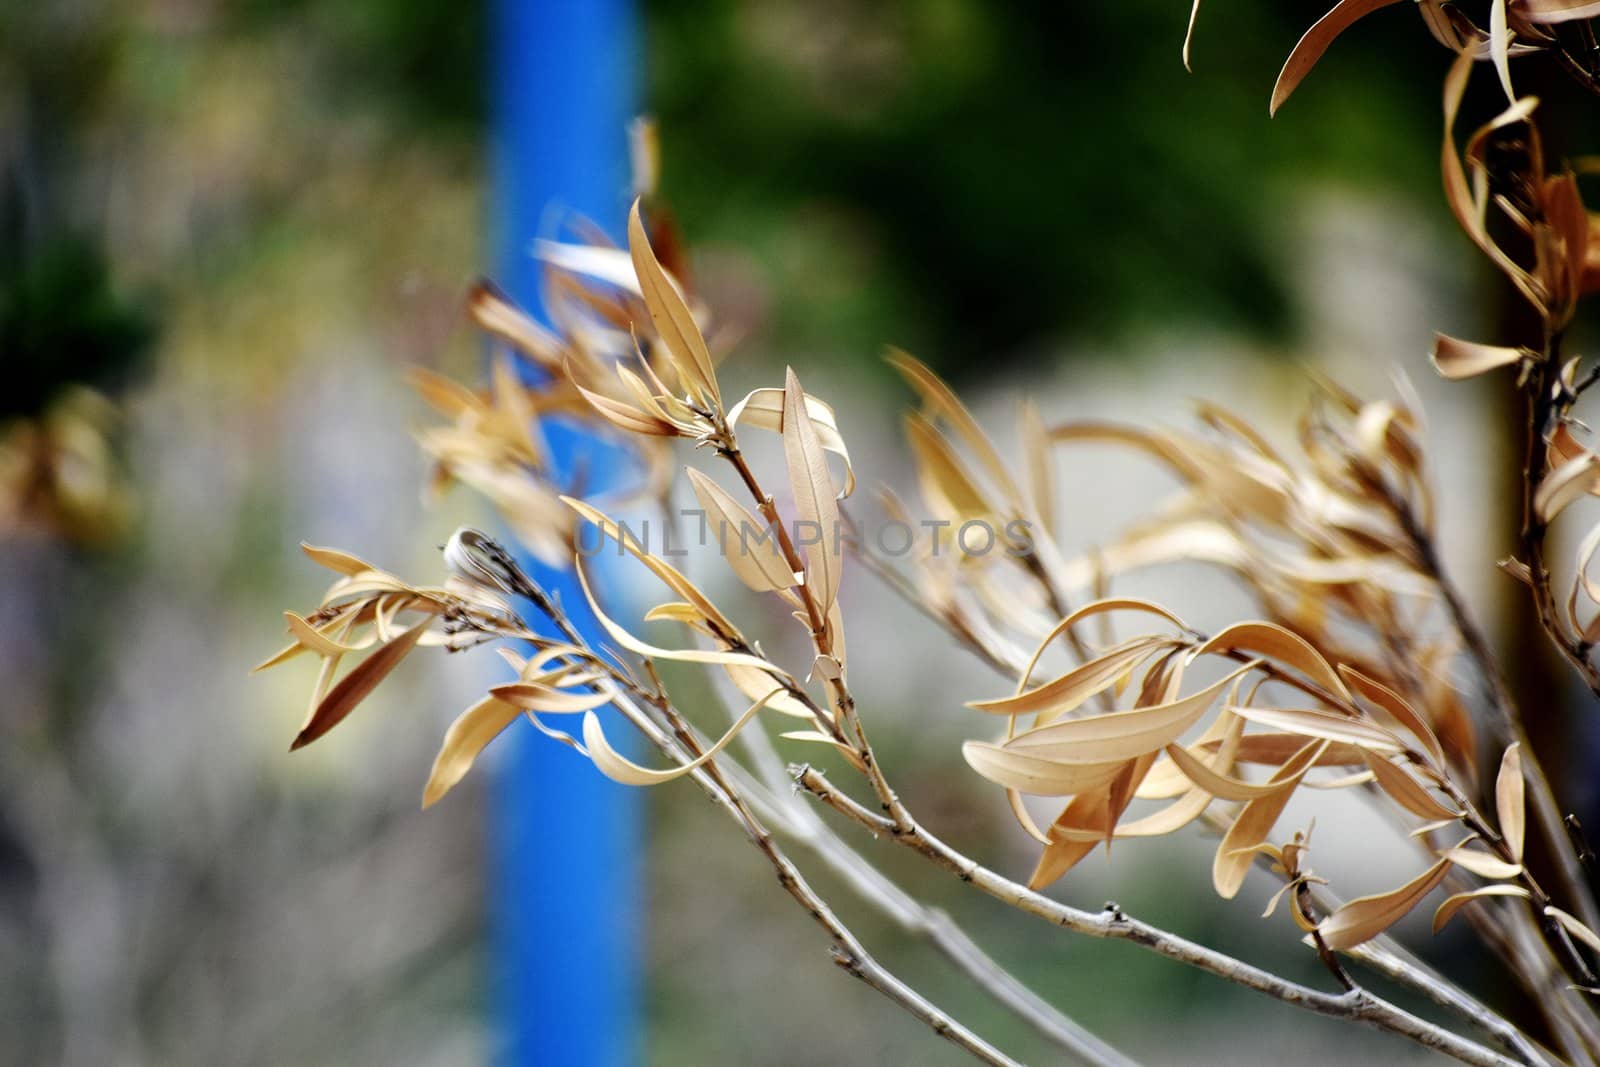 Snap of Dry Leaves by ravindrabhu165165@gmail.com